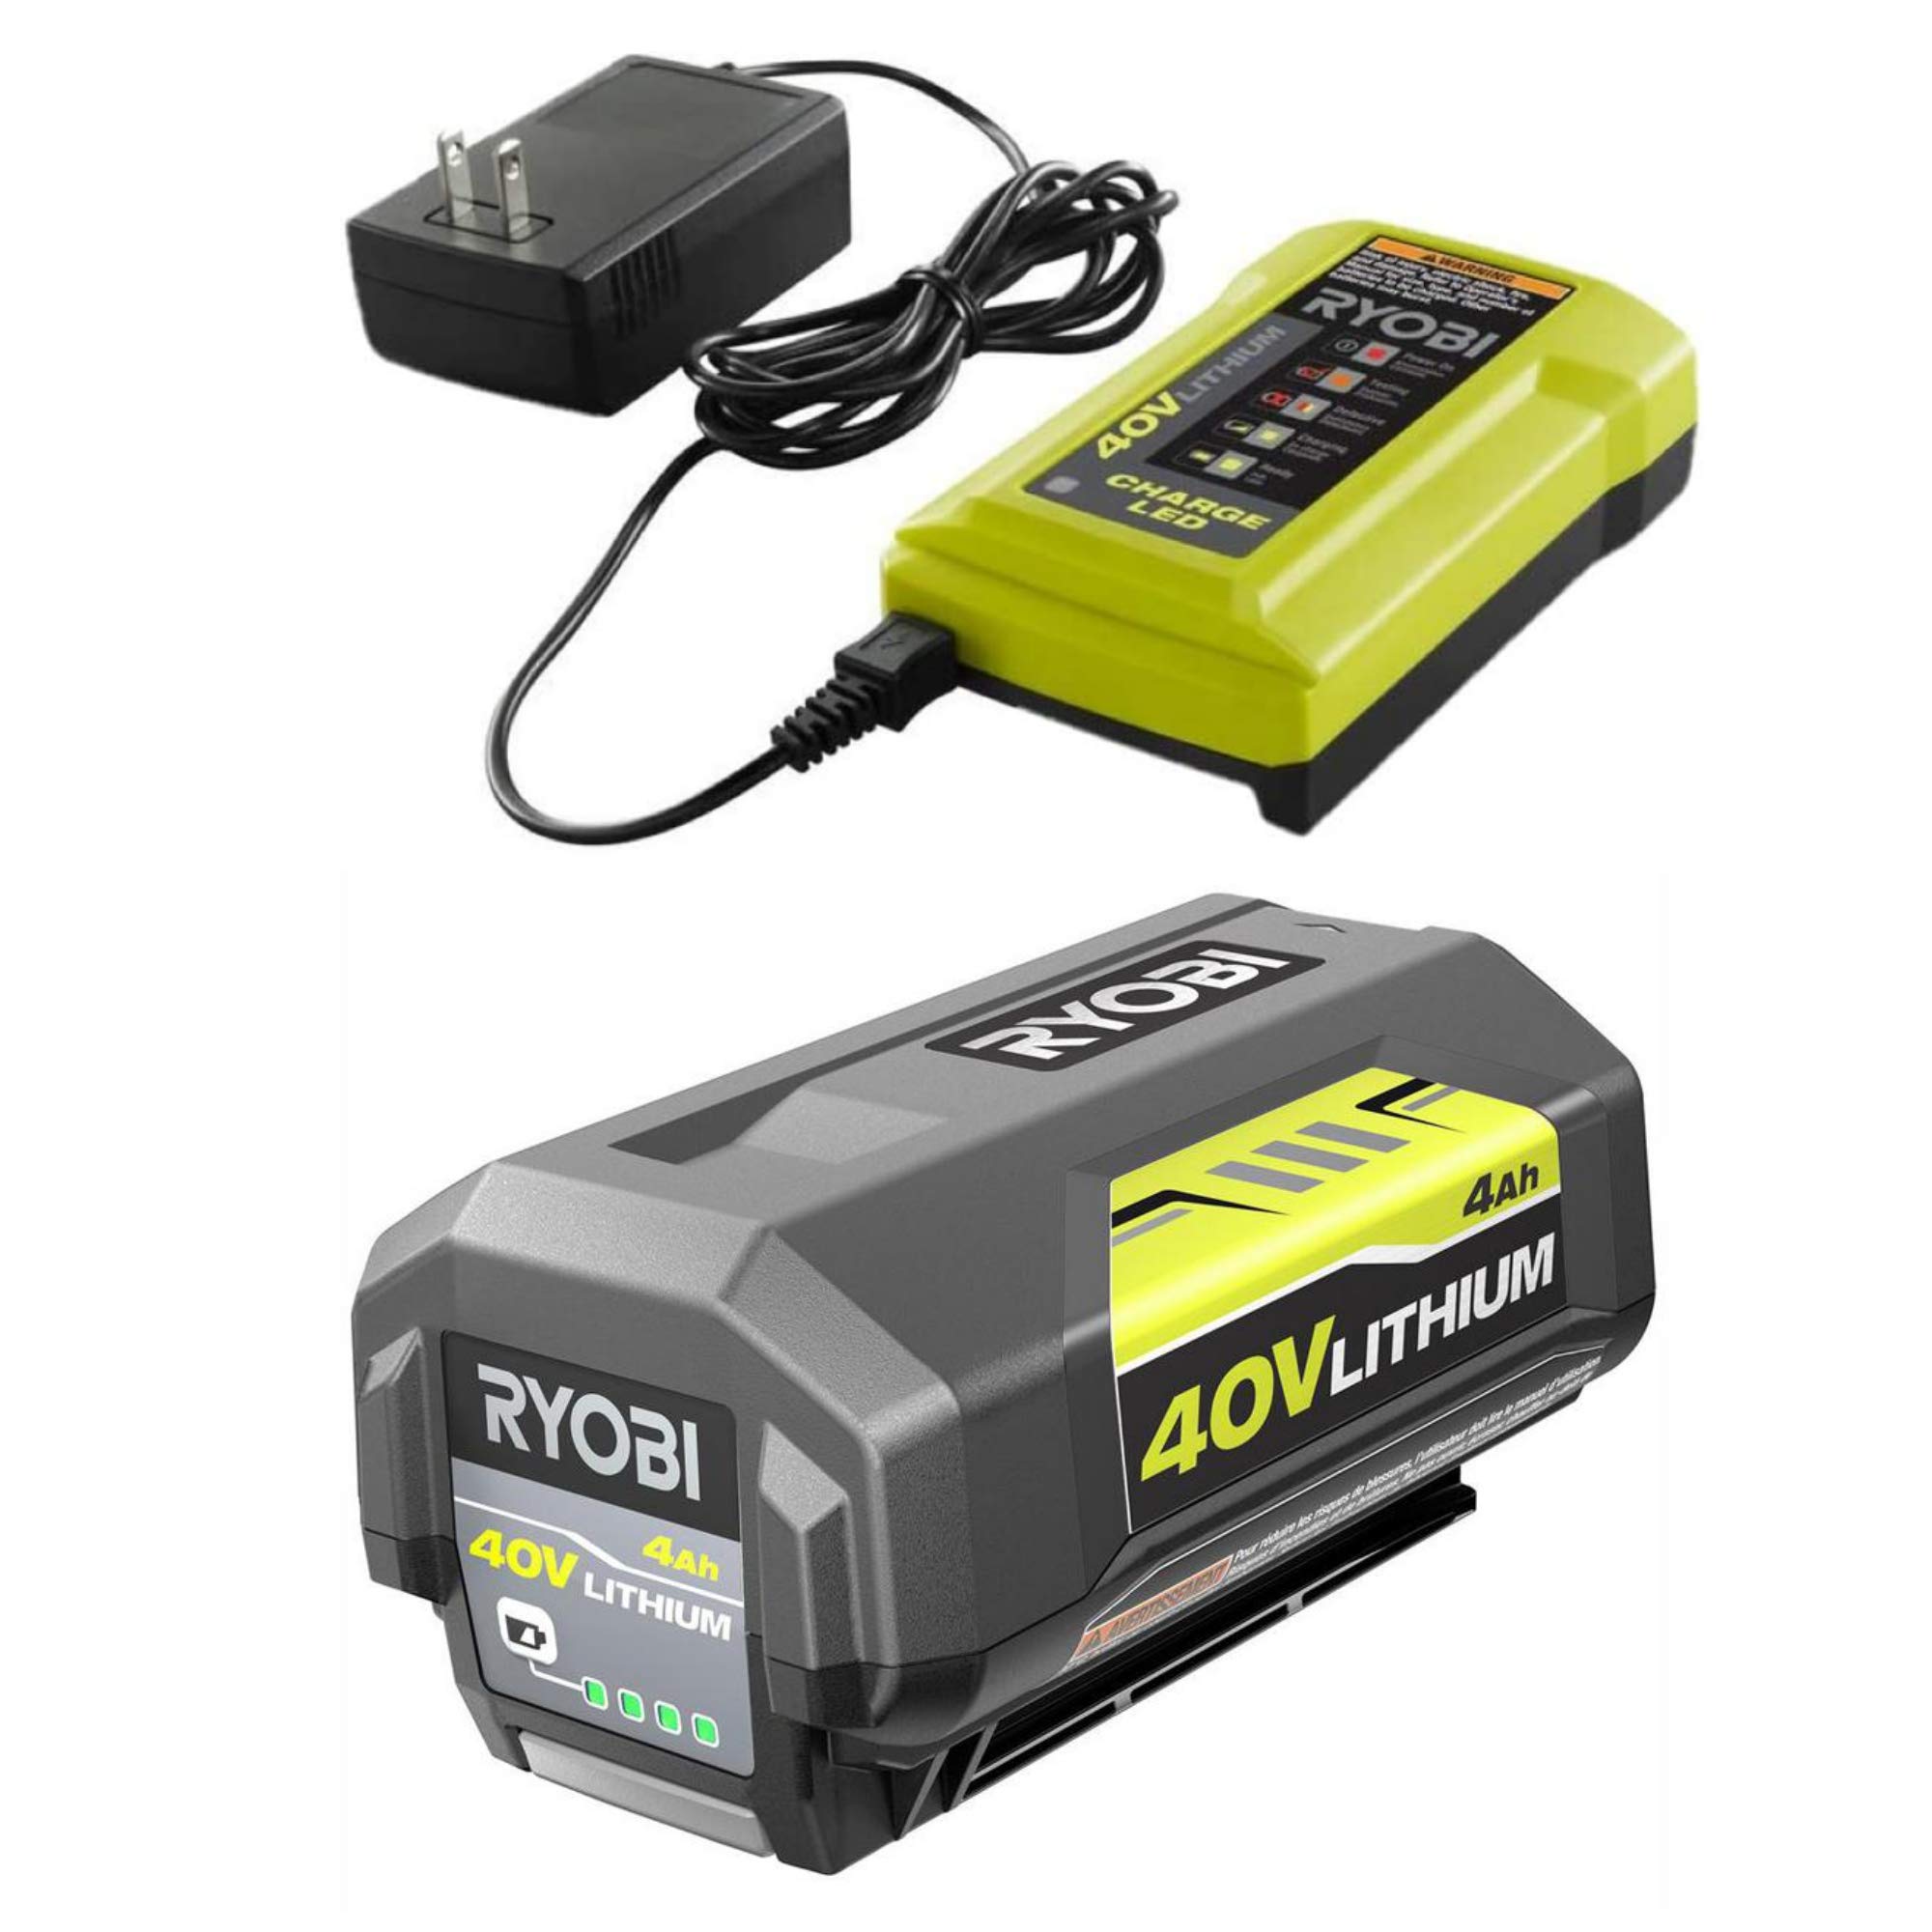 How Do You Know When Ryobi Battery Is Charged